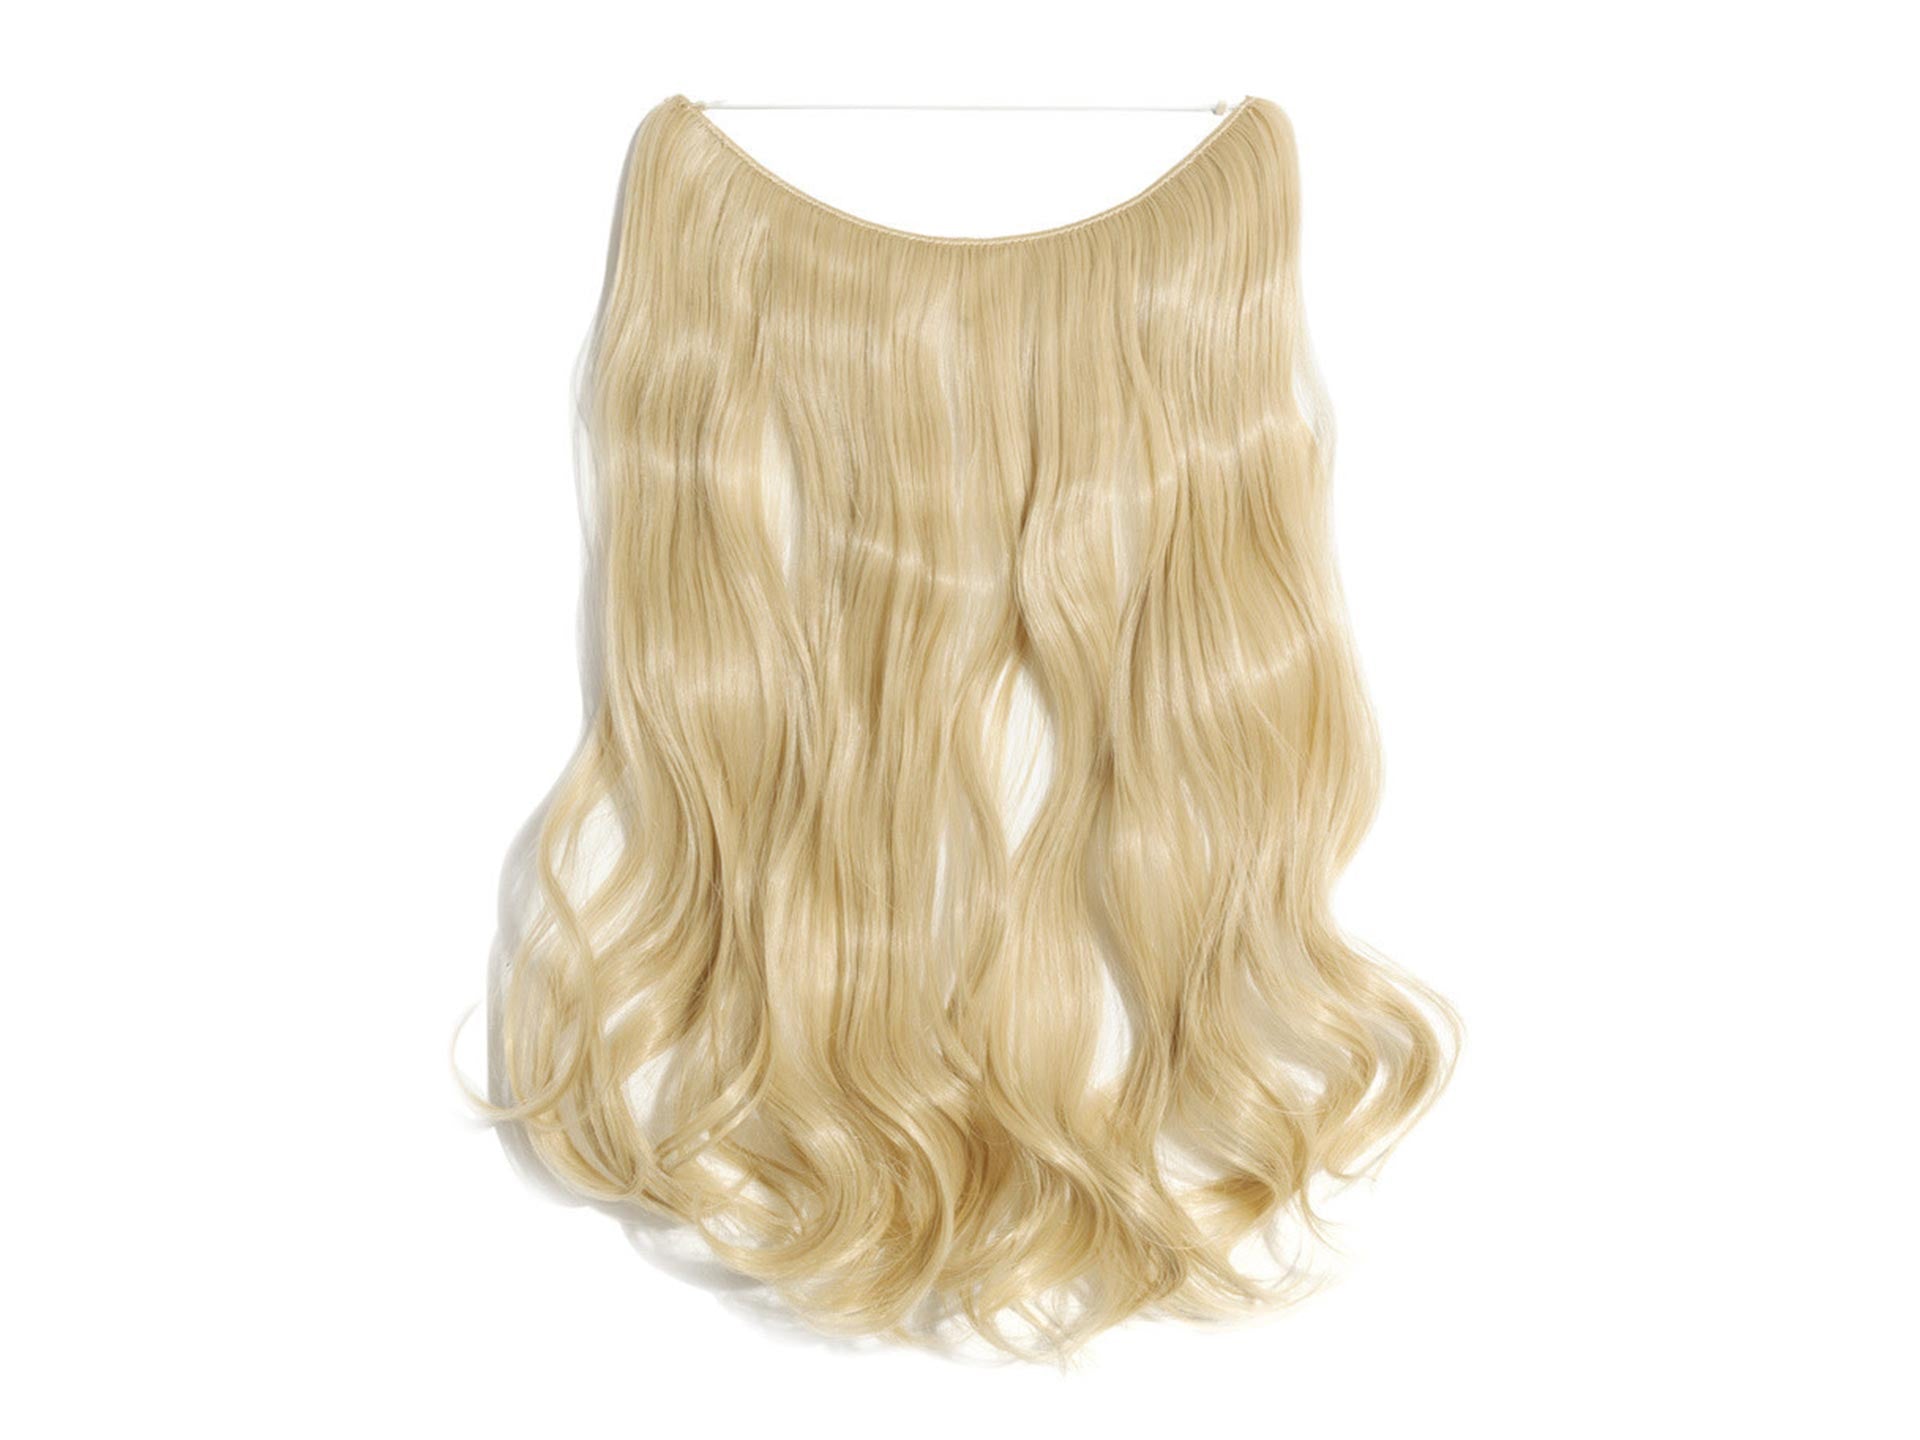 Bohemian Blonde Hair Piece - Halo Hair Extensions - wide 7